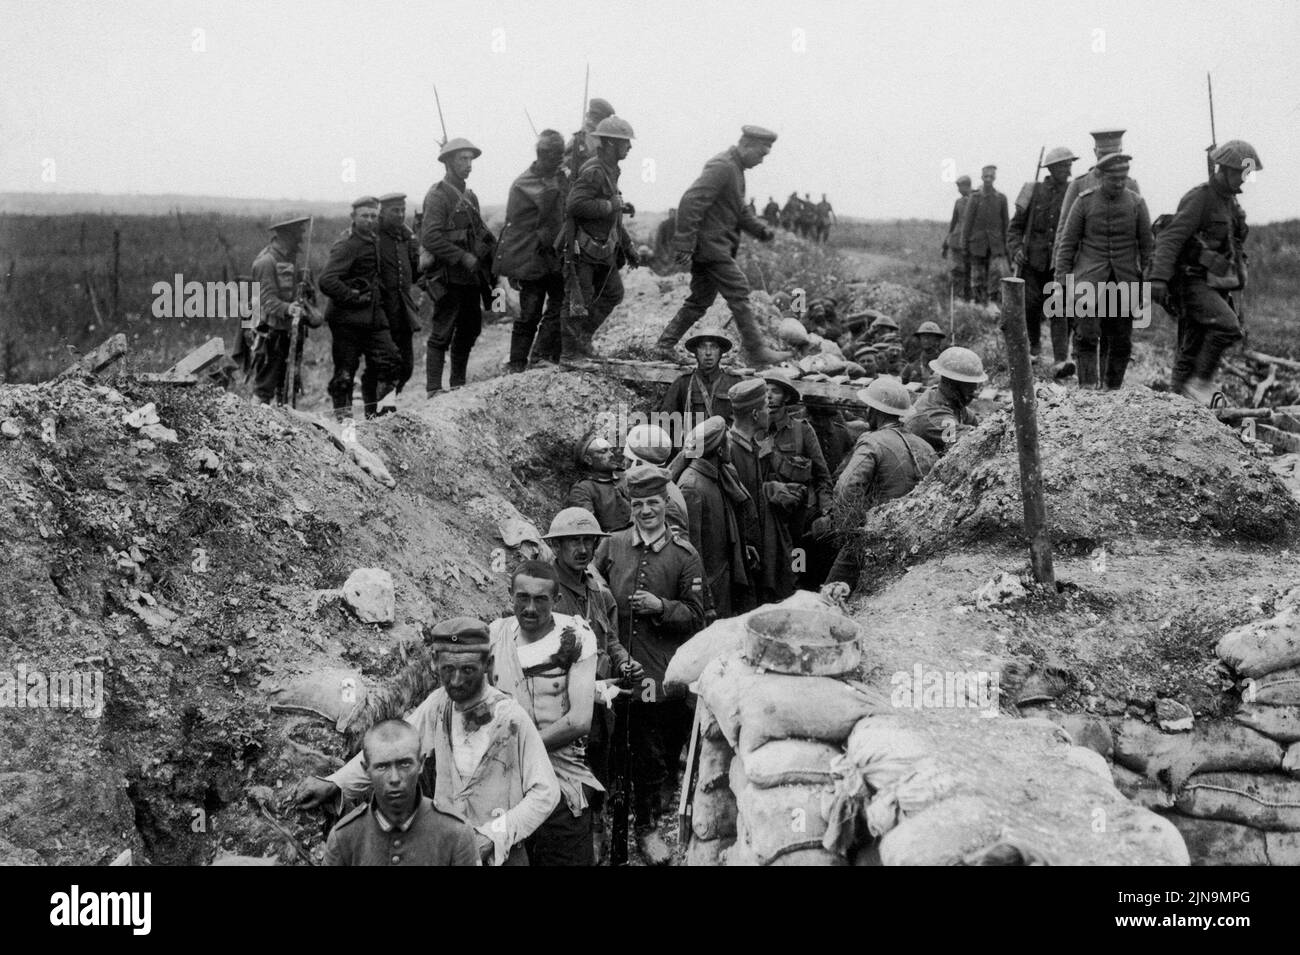 THE SOMME, FRANCE - 1916 - British Army soldiers with German Army PoWs during the Battle of the Somme in France during World War I - Photo: Geopix Stock Photo